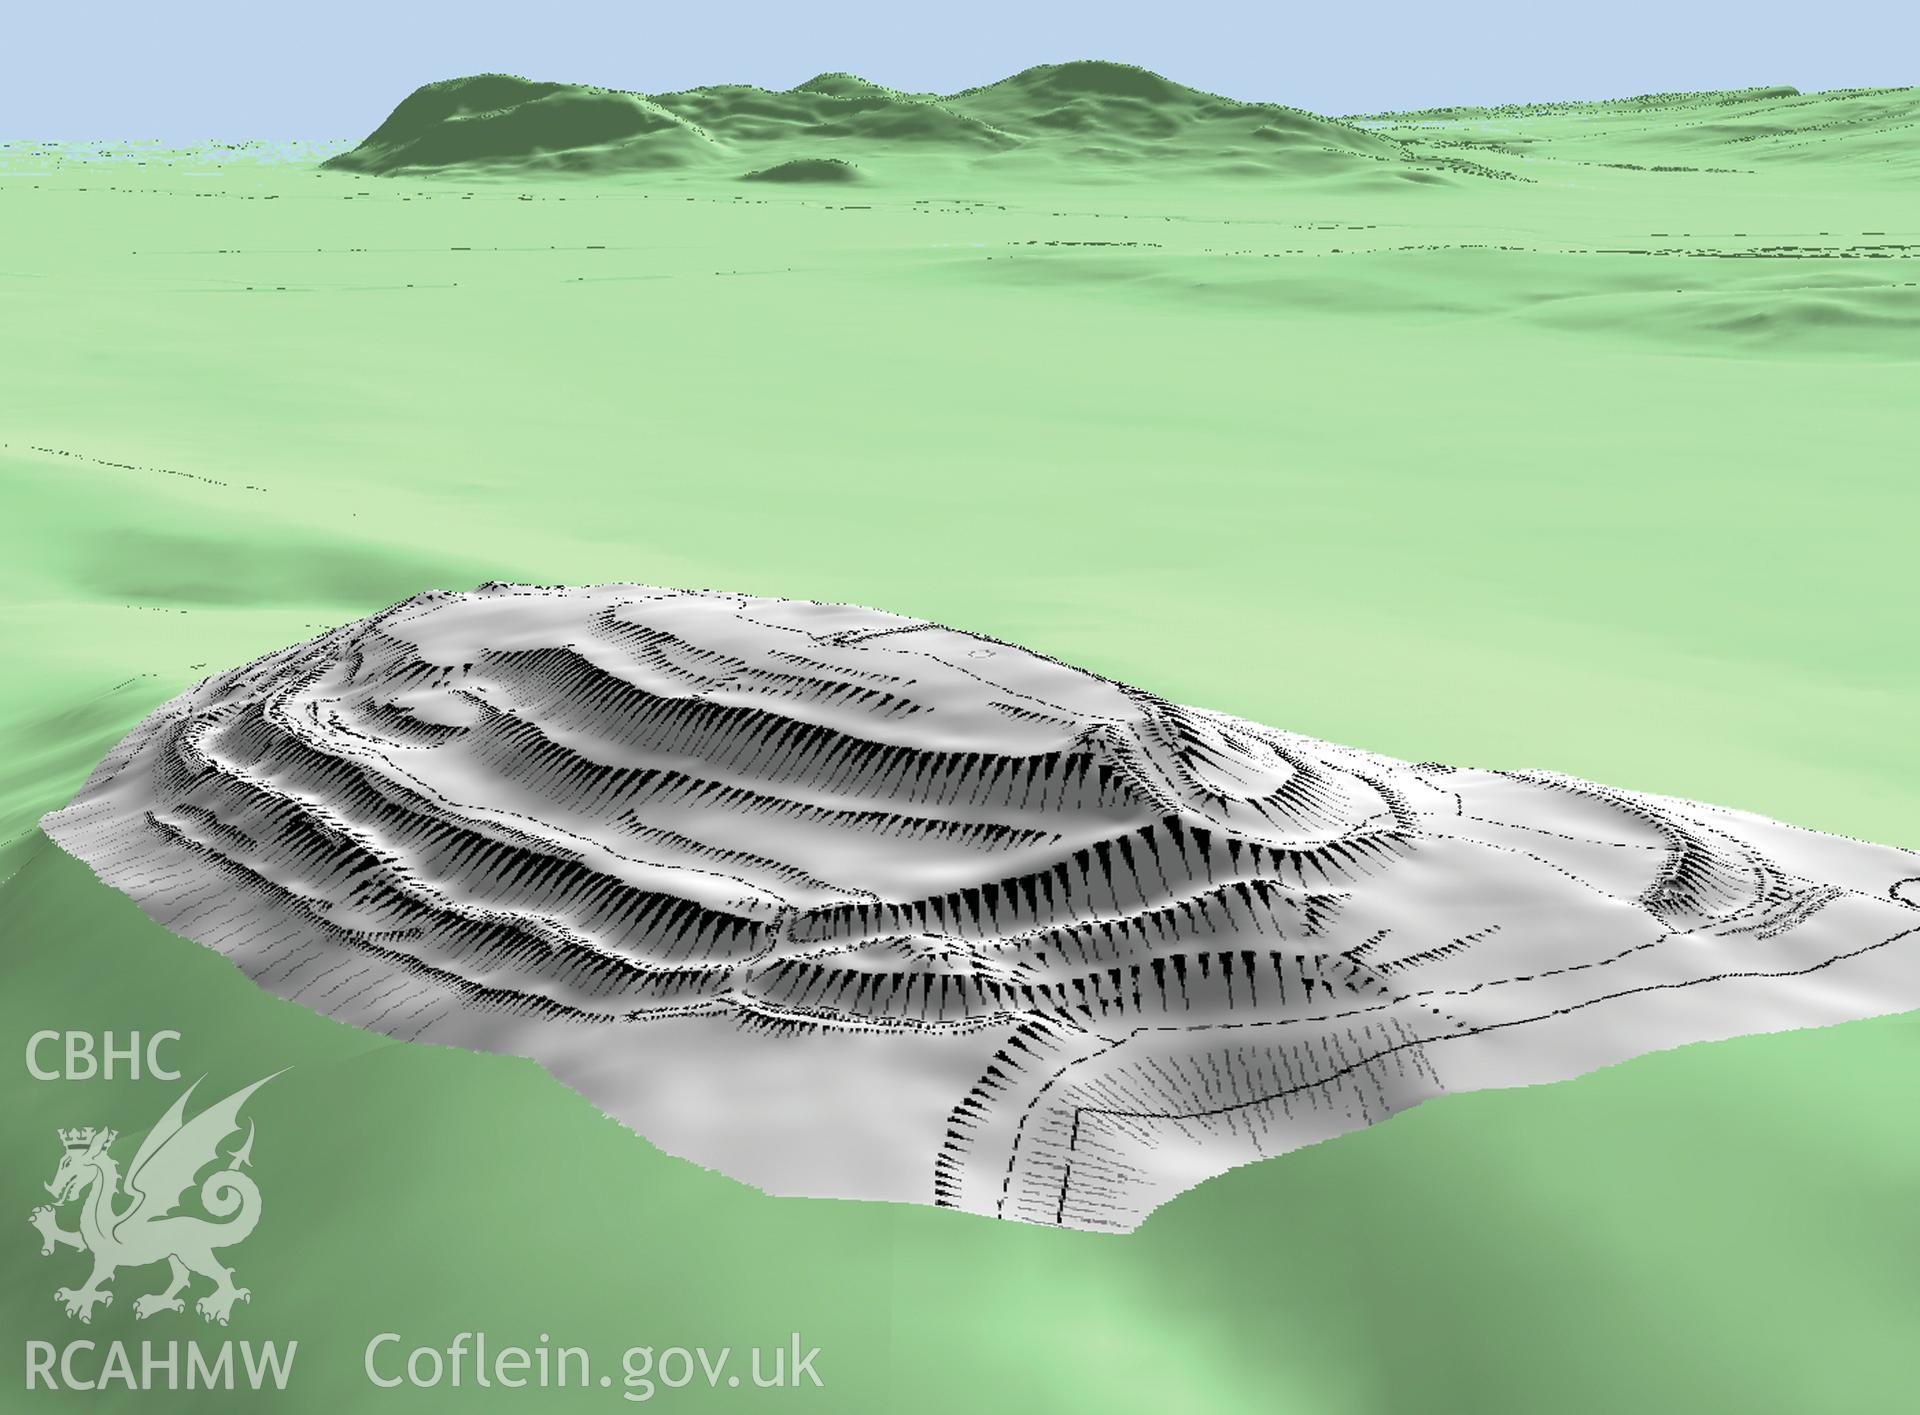 Virtual view of the hillfort, unencumbered by trees, looking across the Severn Valley to the Breidden Hills, from an RCAHMW digital survey of Gaer Fawr, Guilsfield, carried out by Louise Barker, 01/2007. The image is a still from a visualization used in RCAHMW's Hidden Histories TV programme.  It comprises RCAHMW survey data, with the surrounding height data provided by ?GeoPerspectives and ? Landmark Information Group Ltd.